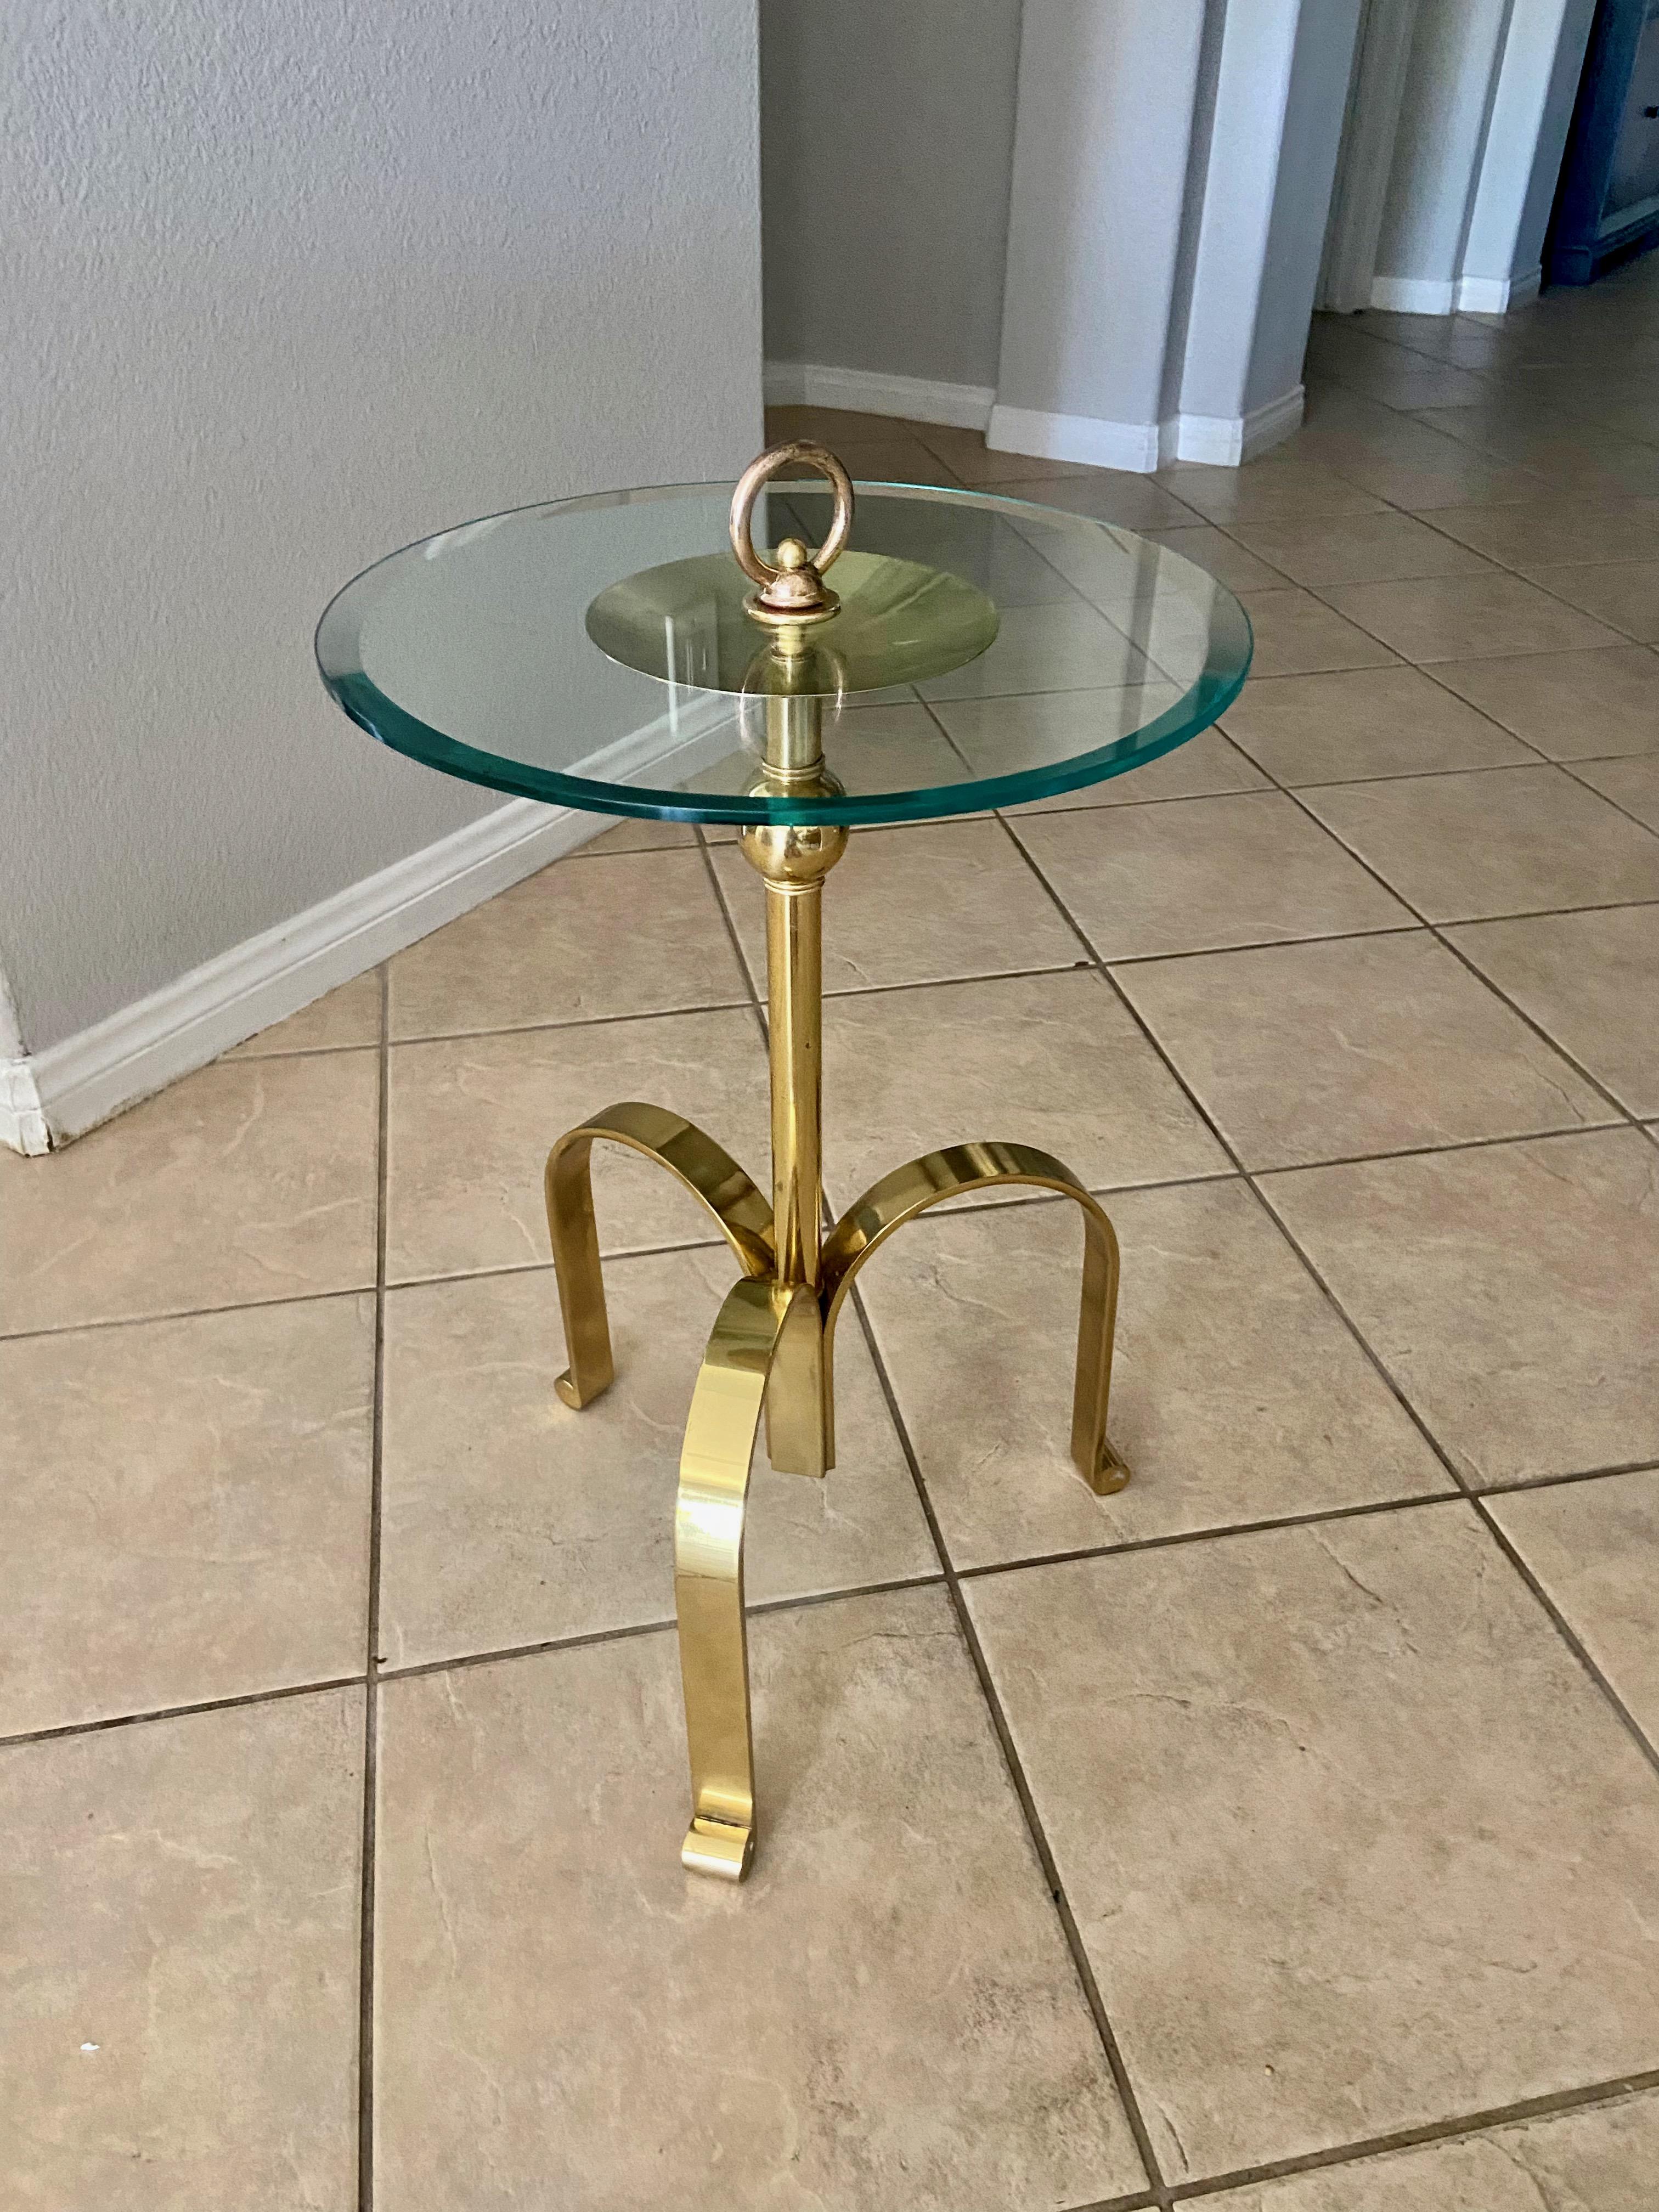 Italian tripod solid brass tripod side or end table with round glass top. The brass table has decorative unique features, and is well constructed using heavy solid brass. 

 